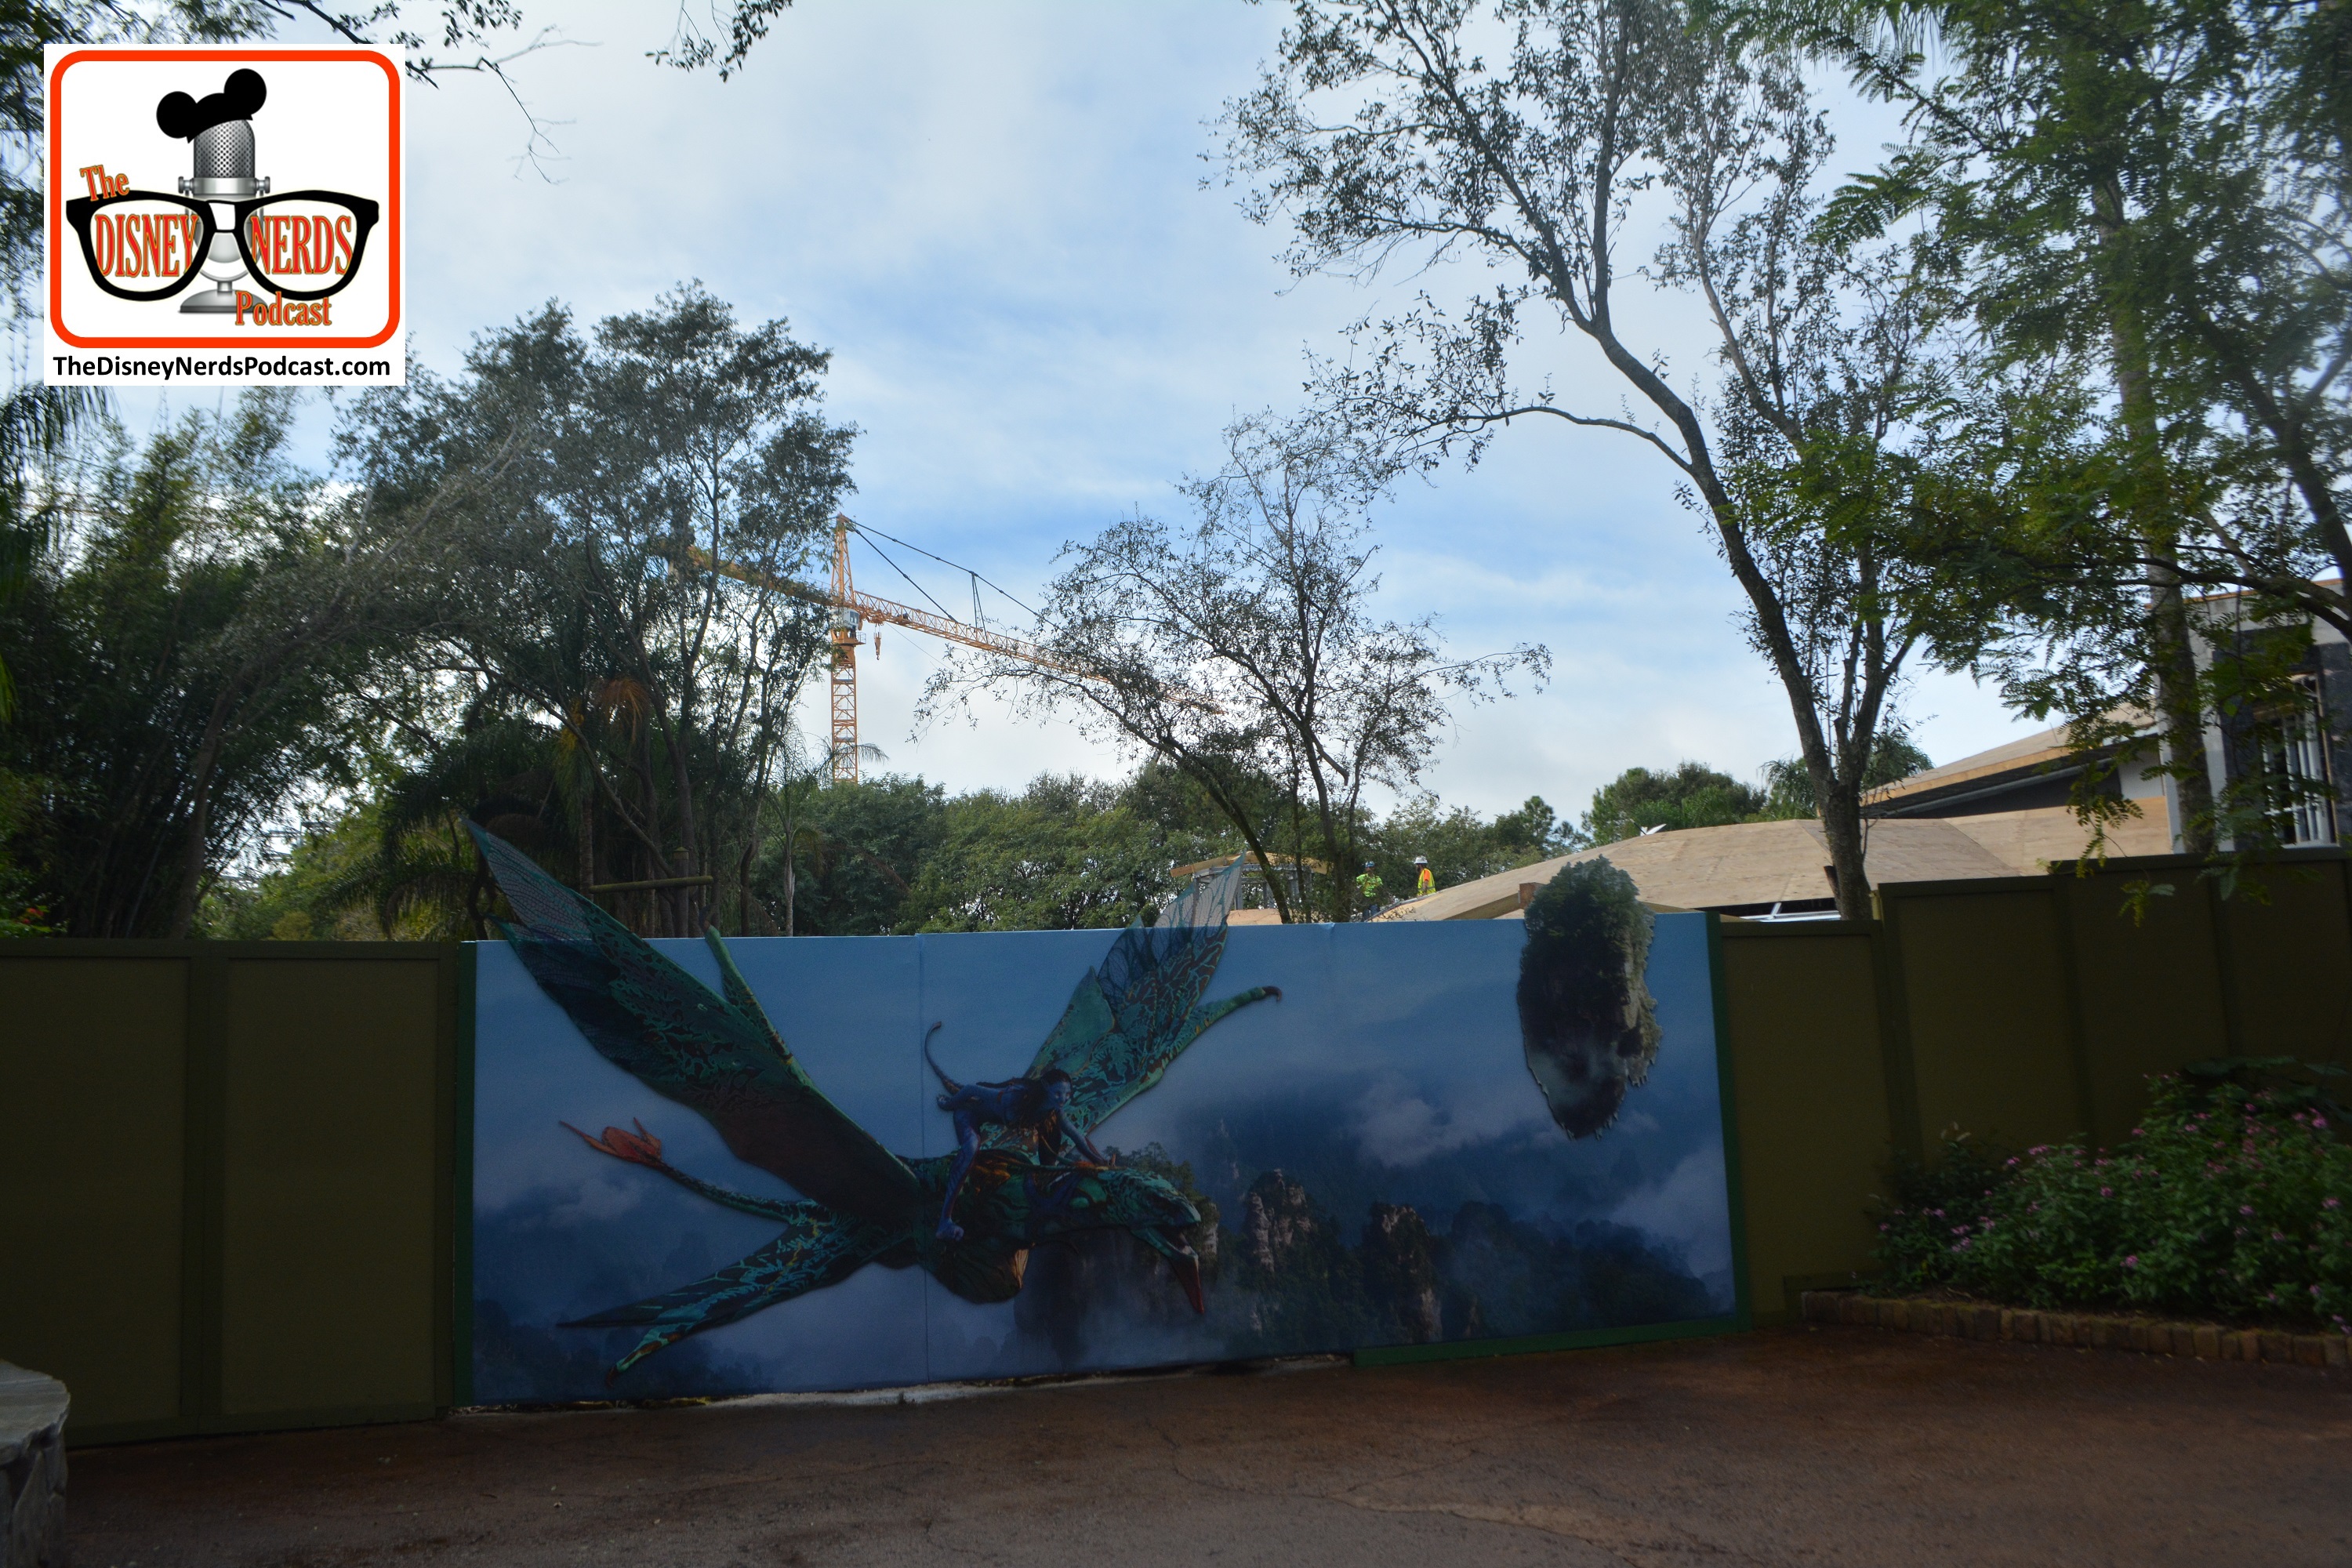 2015-12 - Animal Kingdom - Pandora–The World of Avatar construction Concept Art now on the path that once lead to camp Minnie Mickey